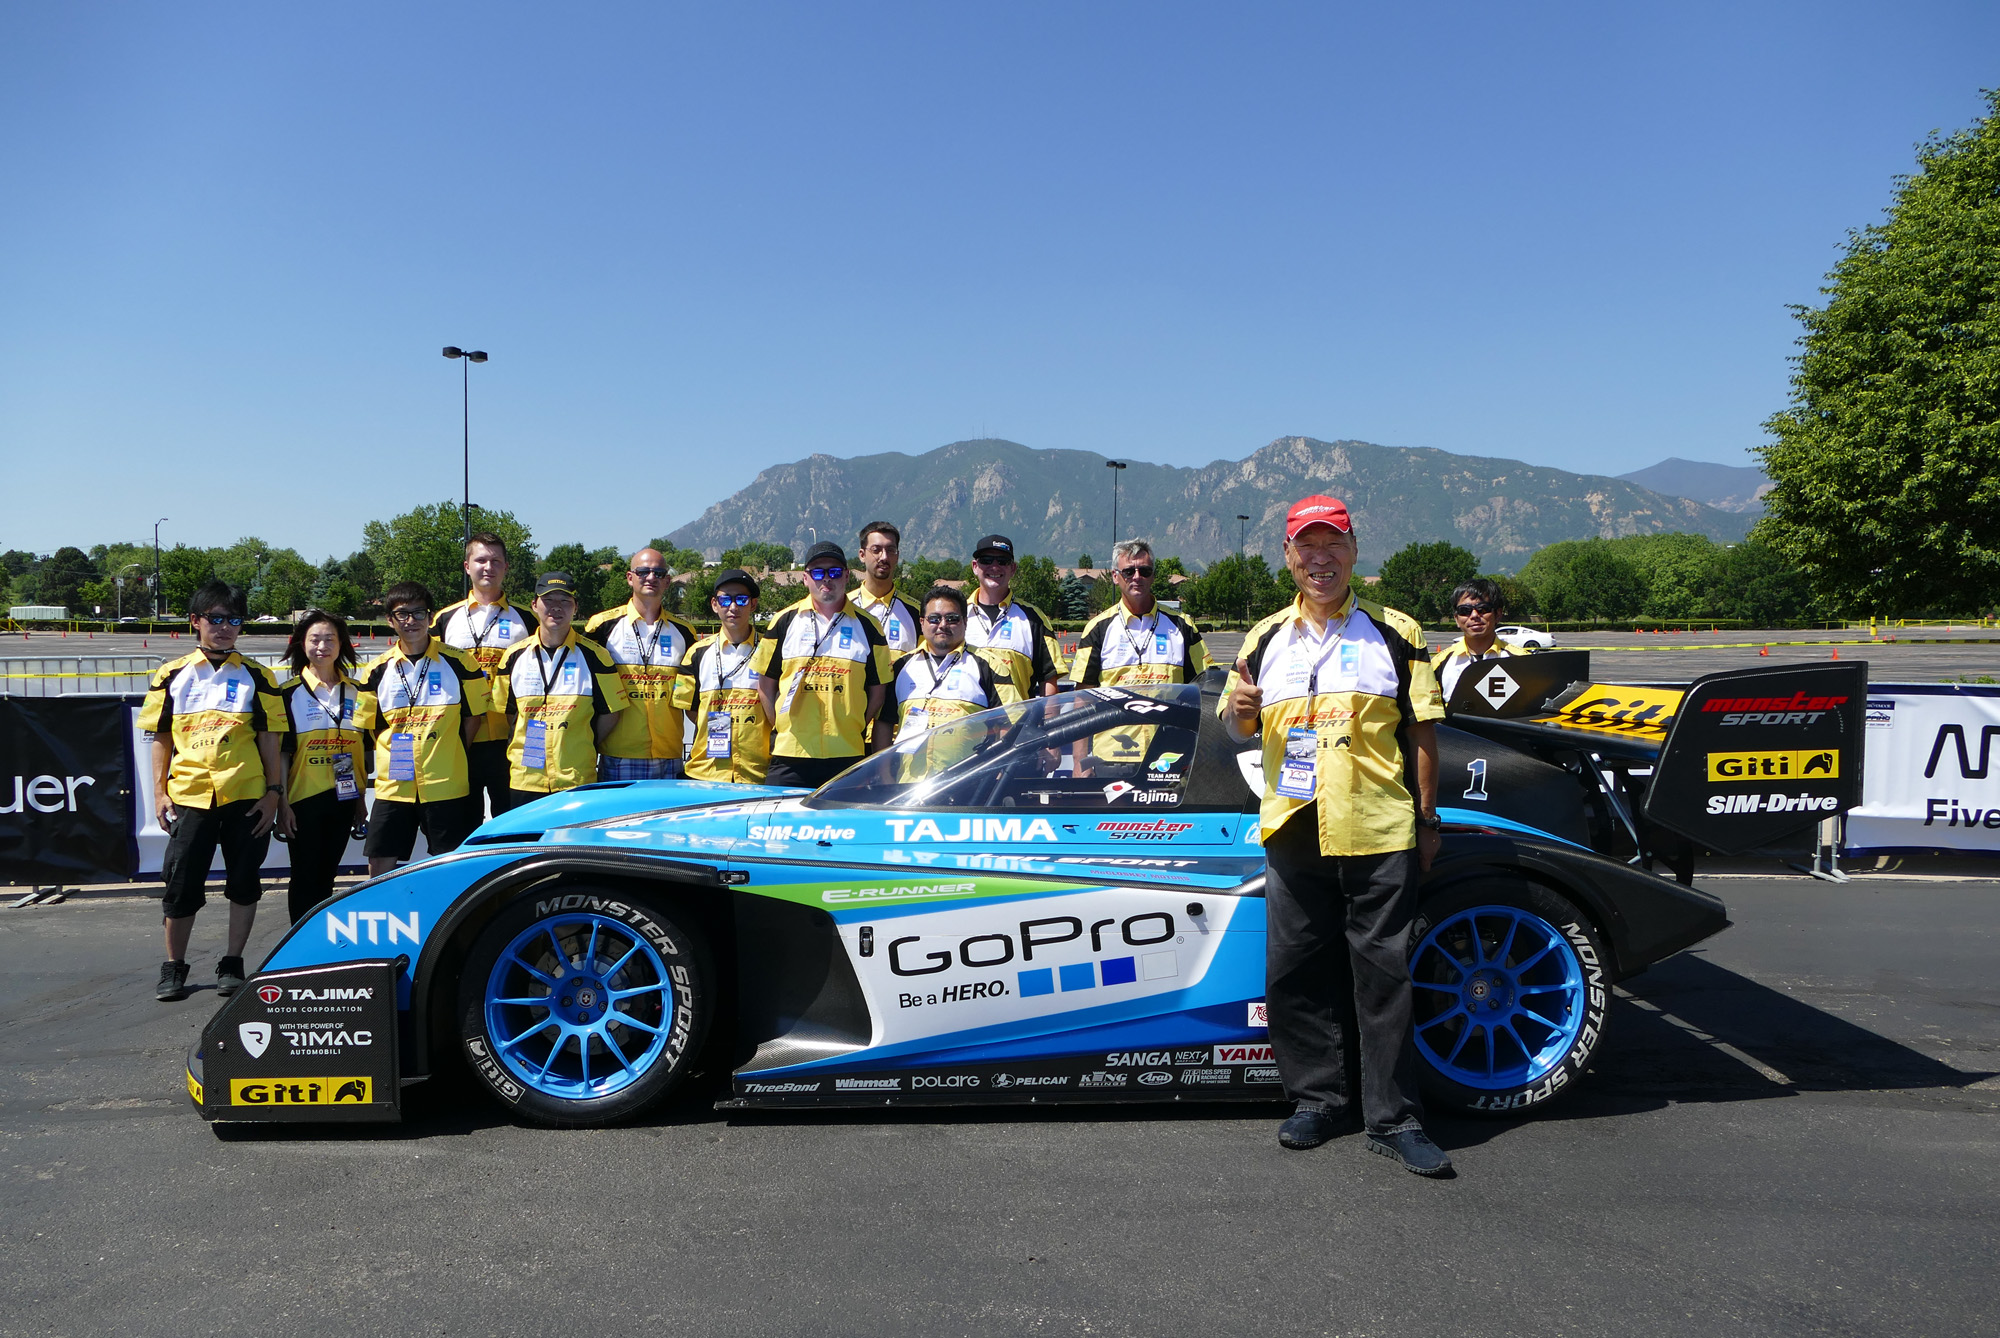 2015 Pikes Peak International Hill Climb Race Report June 23 - Sanctioned Practice Day